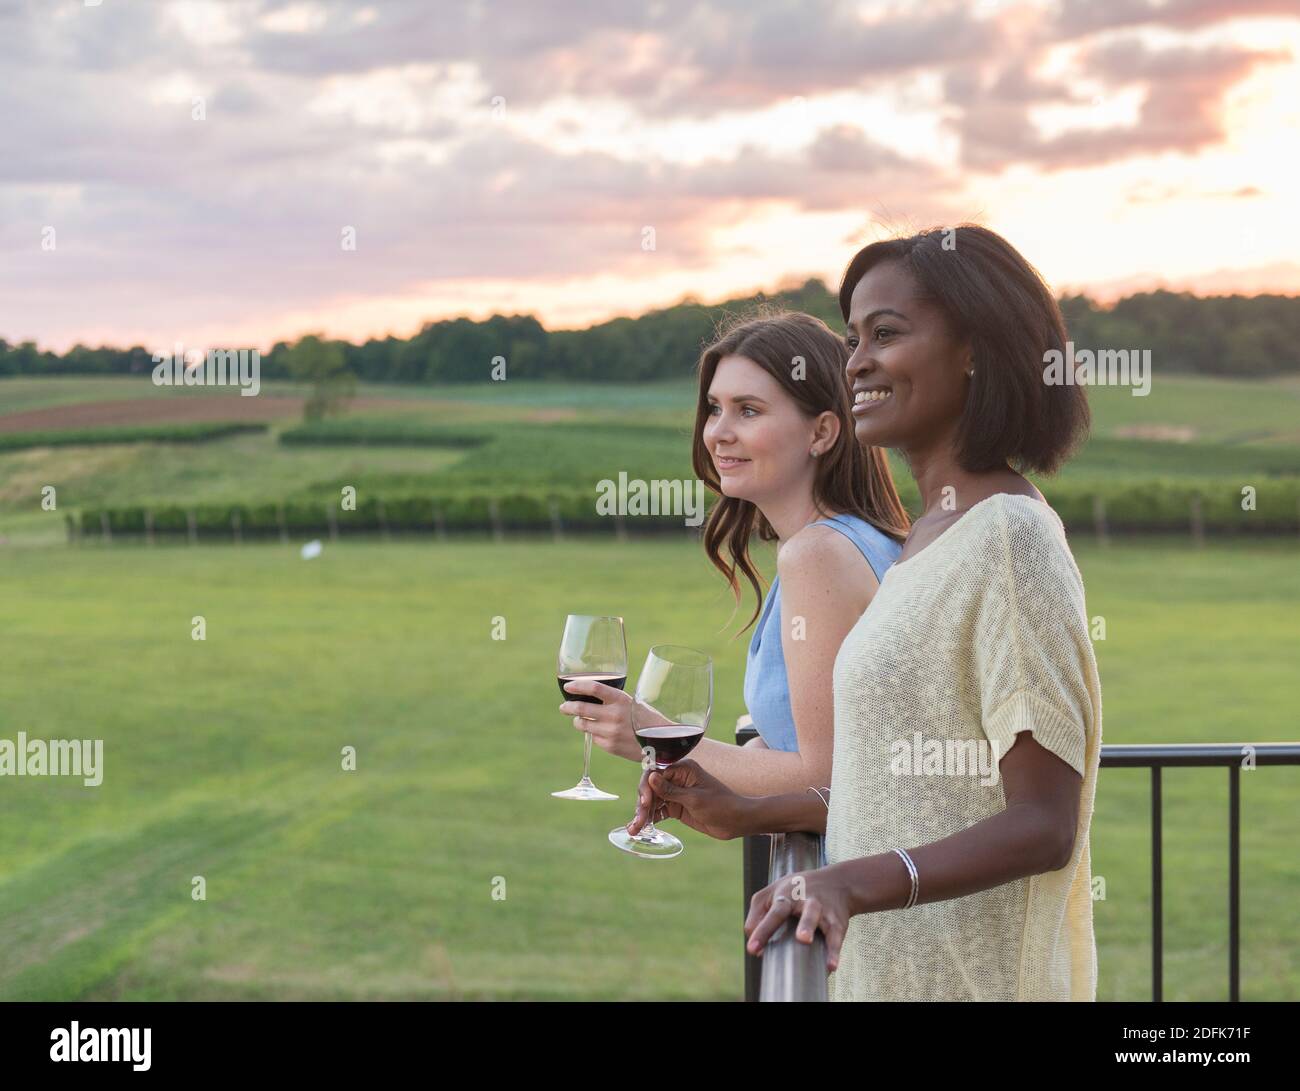 Young women drink wine together on a balcony at a winery. Stock Photo